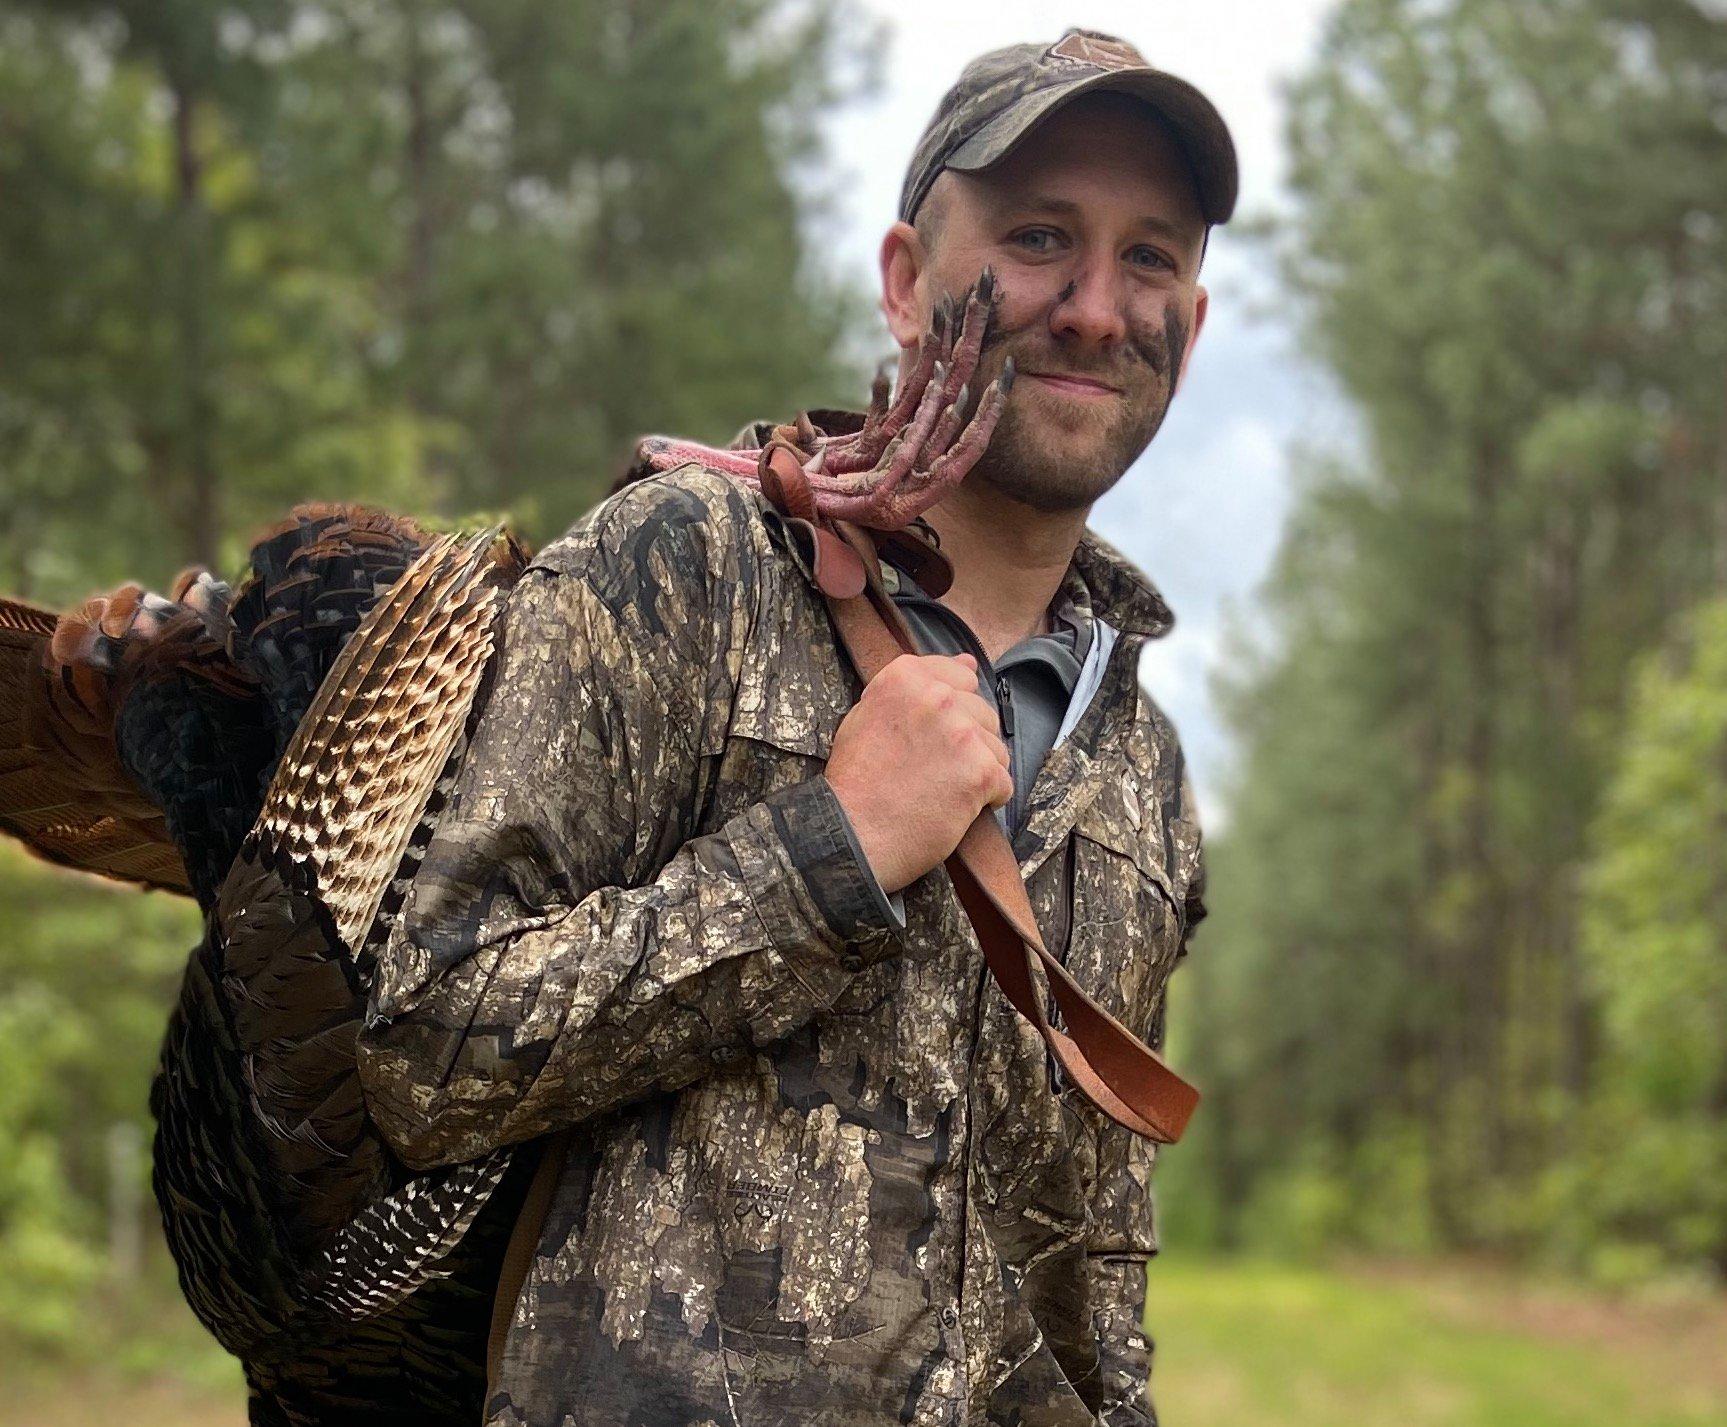 Realtree.com Editor Will Brantley has hunted turkeys just about everywhere that they live.